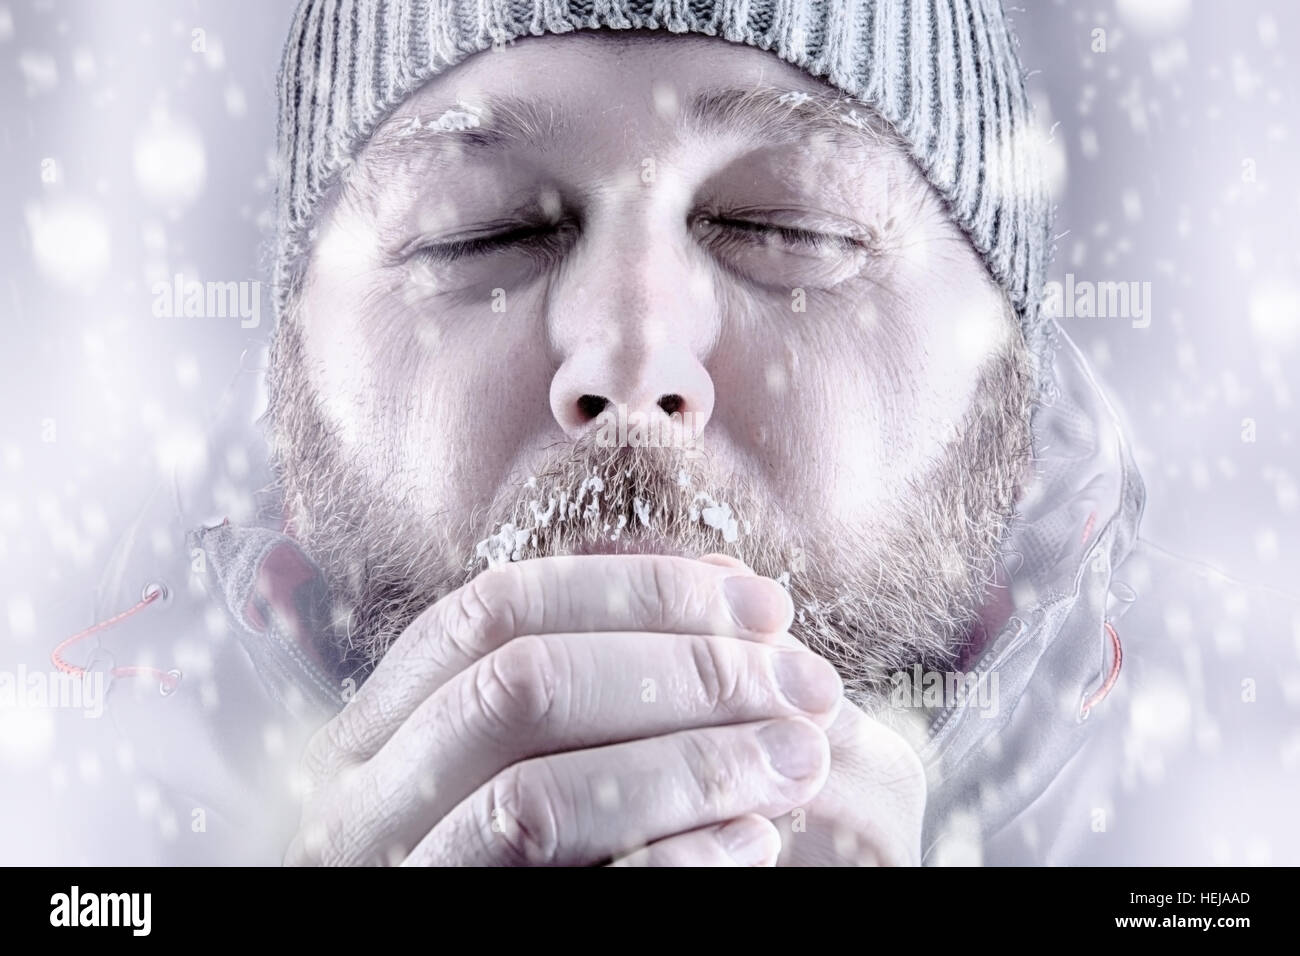 Freezing cold man in snow storm white out trying to keep warm by blowing into his hands. Stock Photo